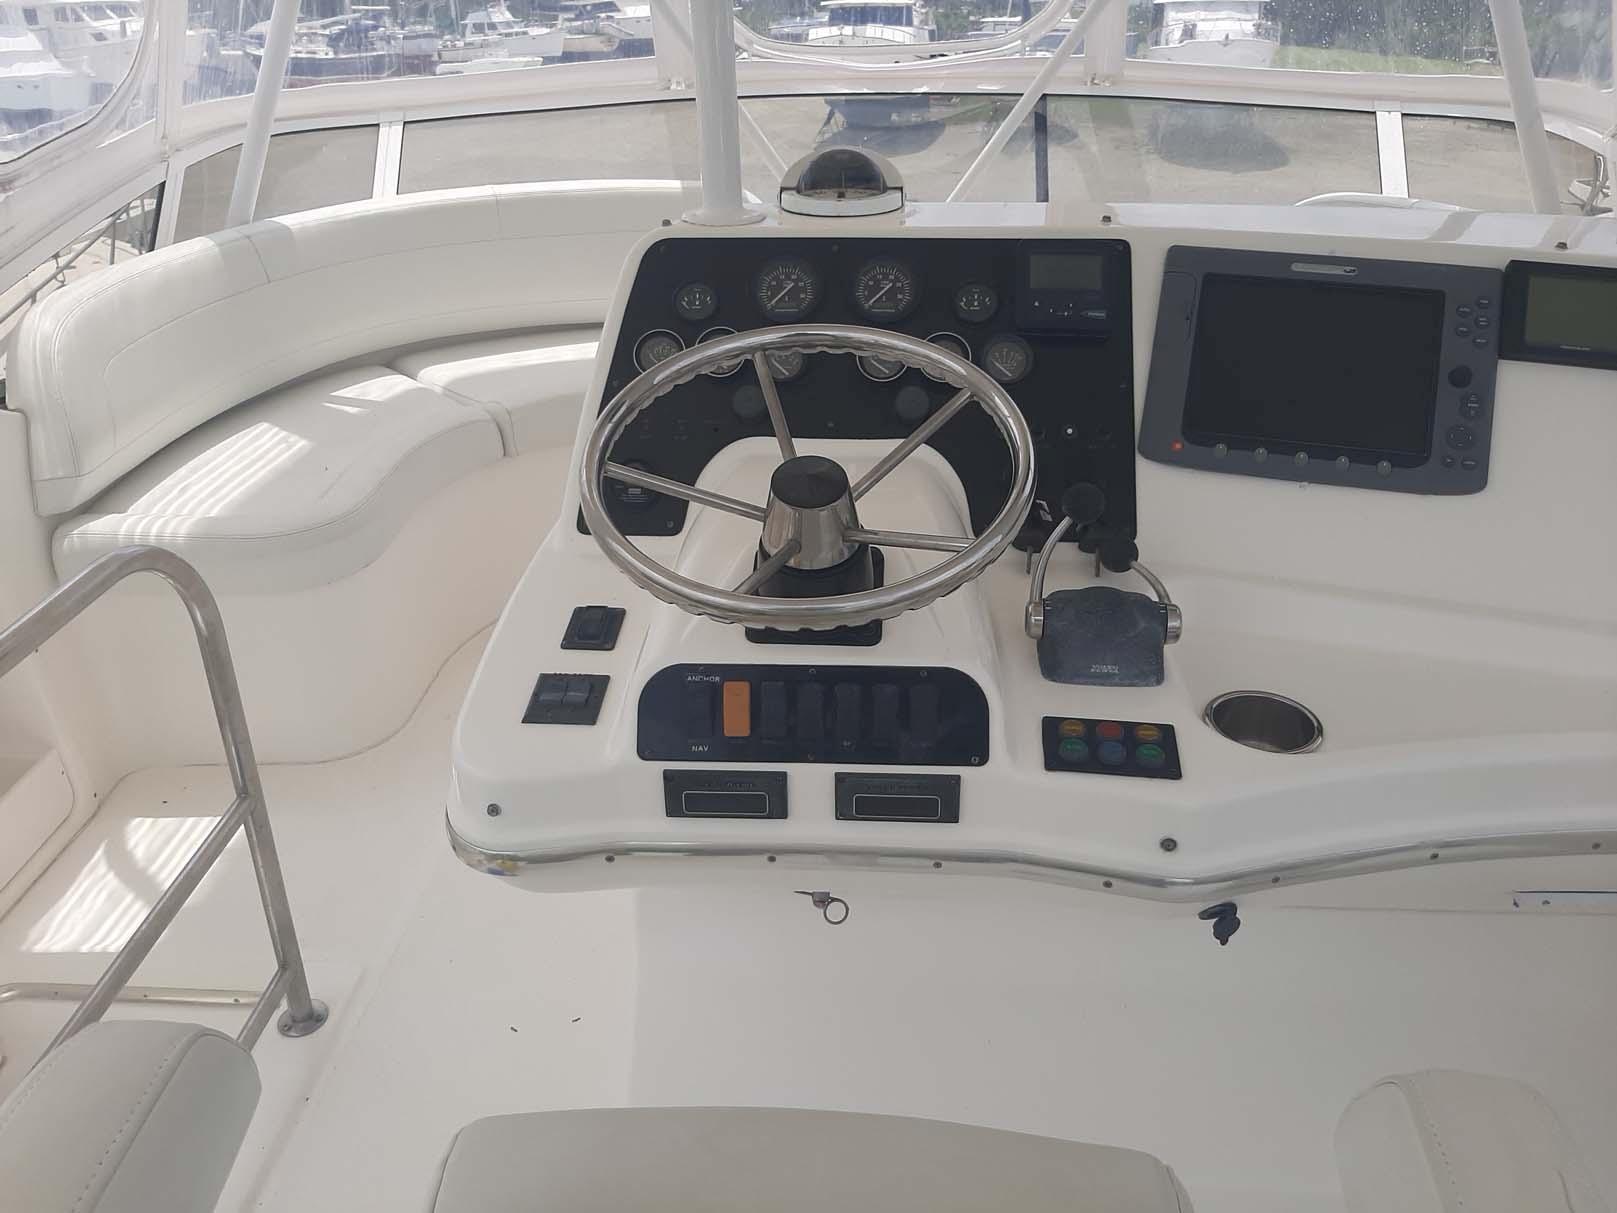 Helm View Behind Captain's Chair